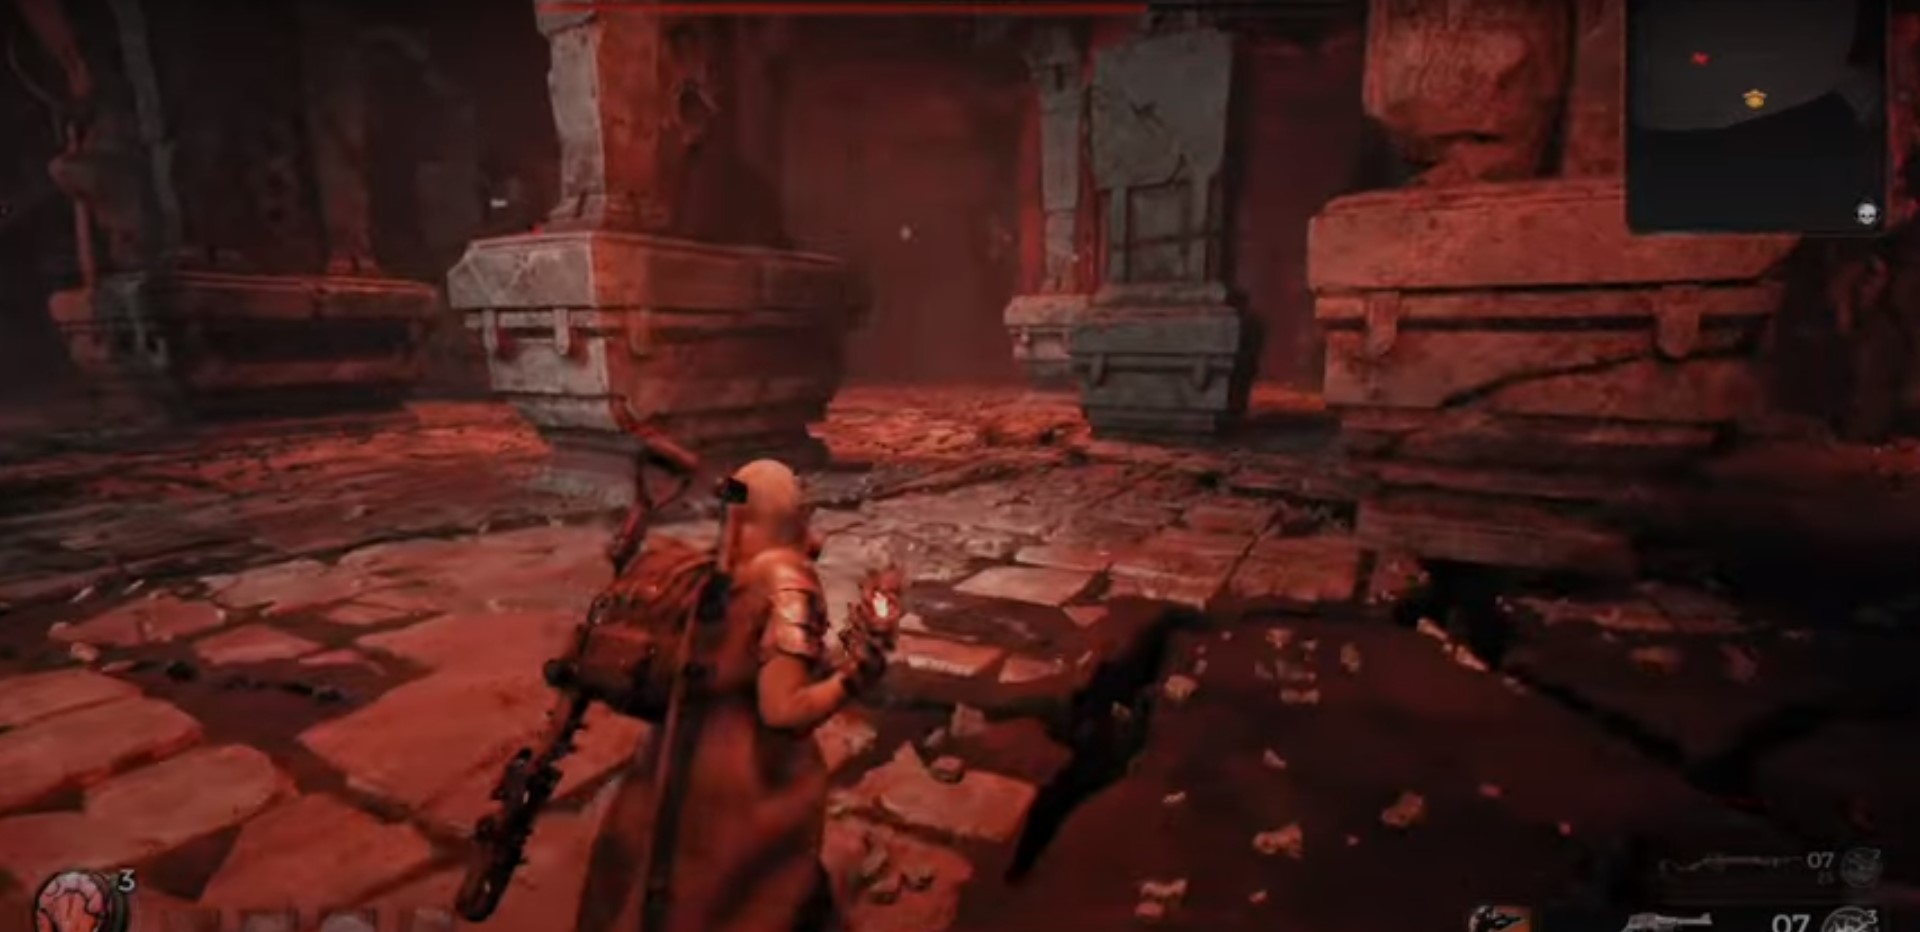 Use Pillars To Hide From Ravager Attacks